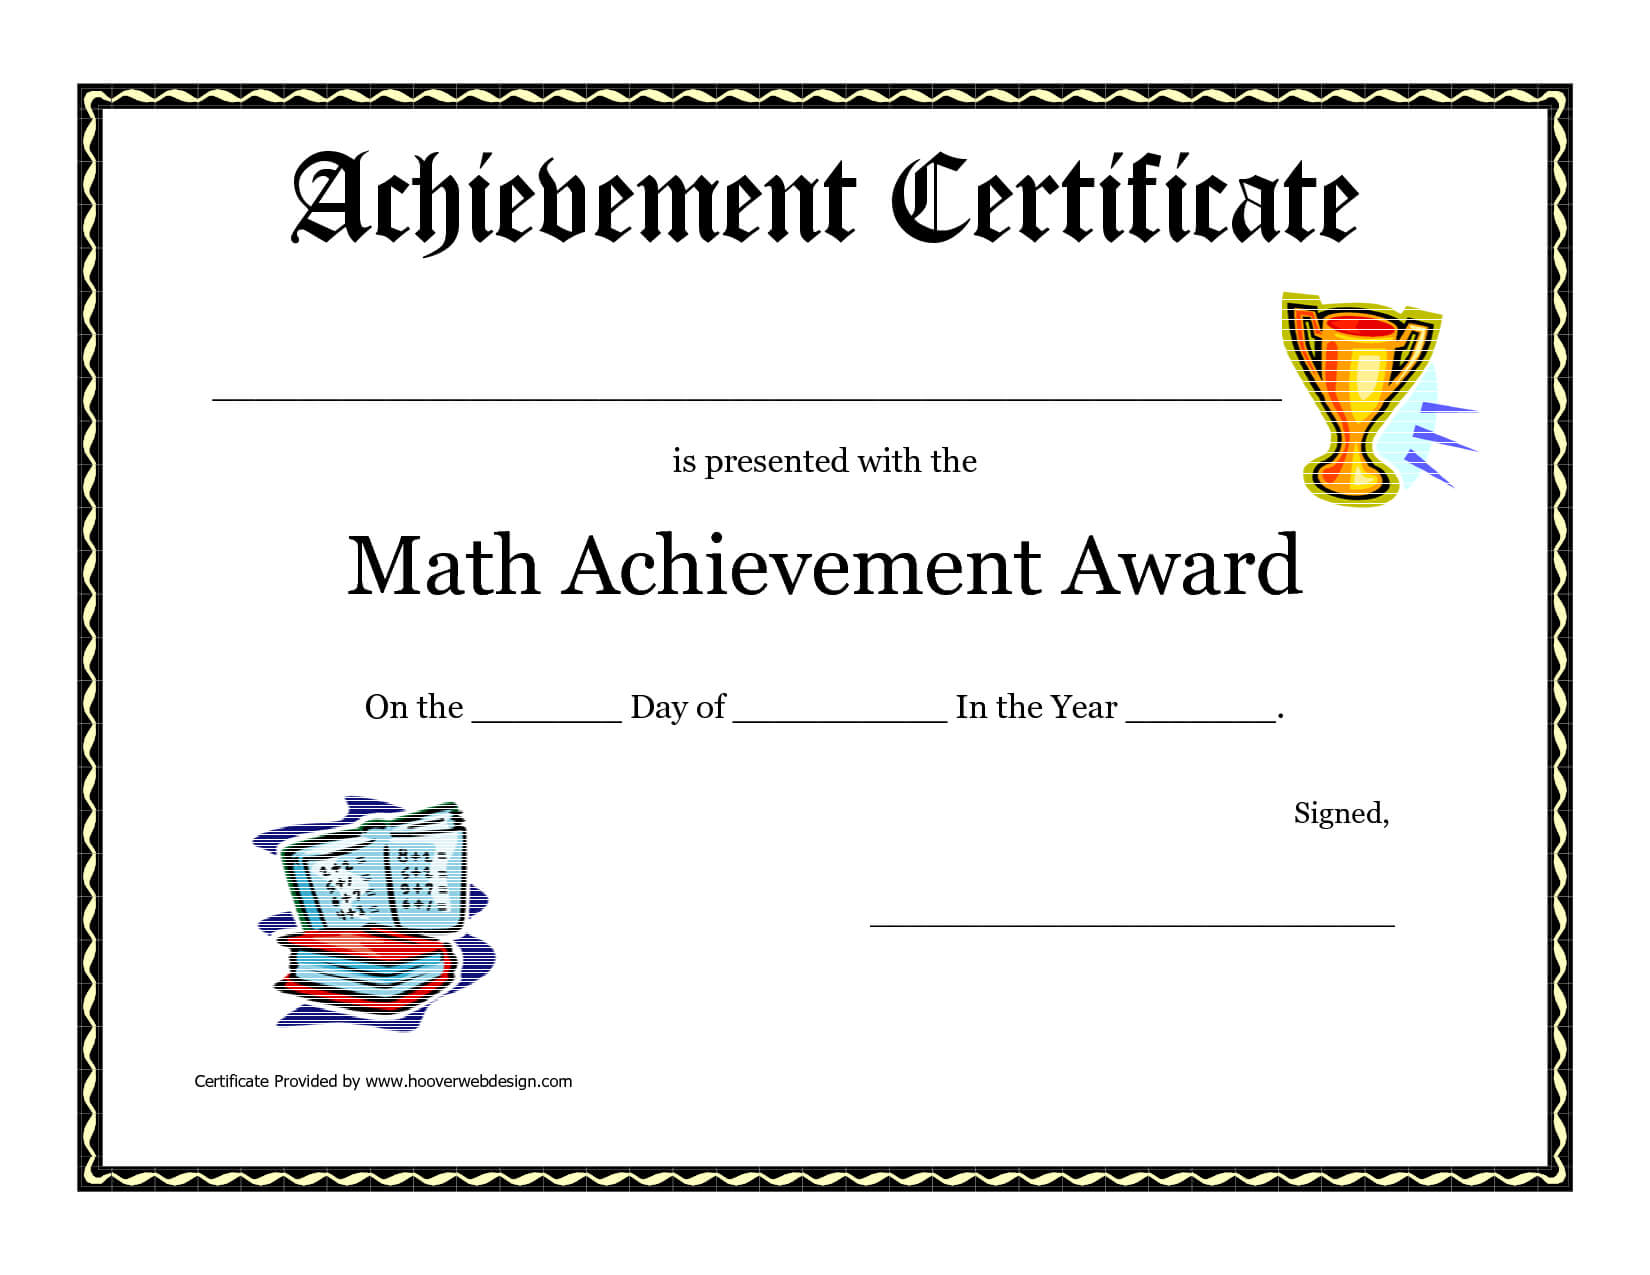 Math Achievement Award Printable Certificate Pdf | Math In Hayes Certificate Templates